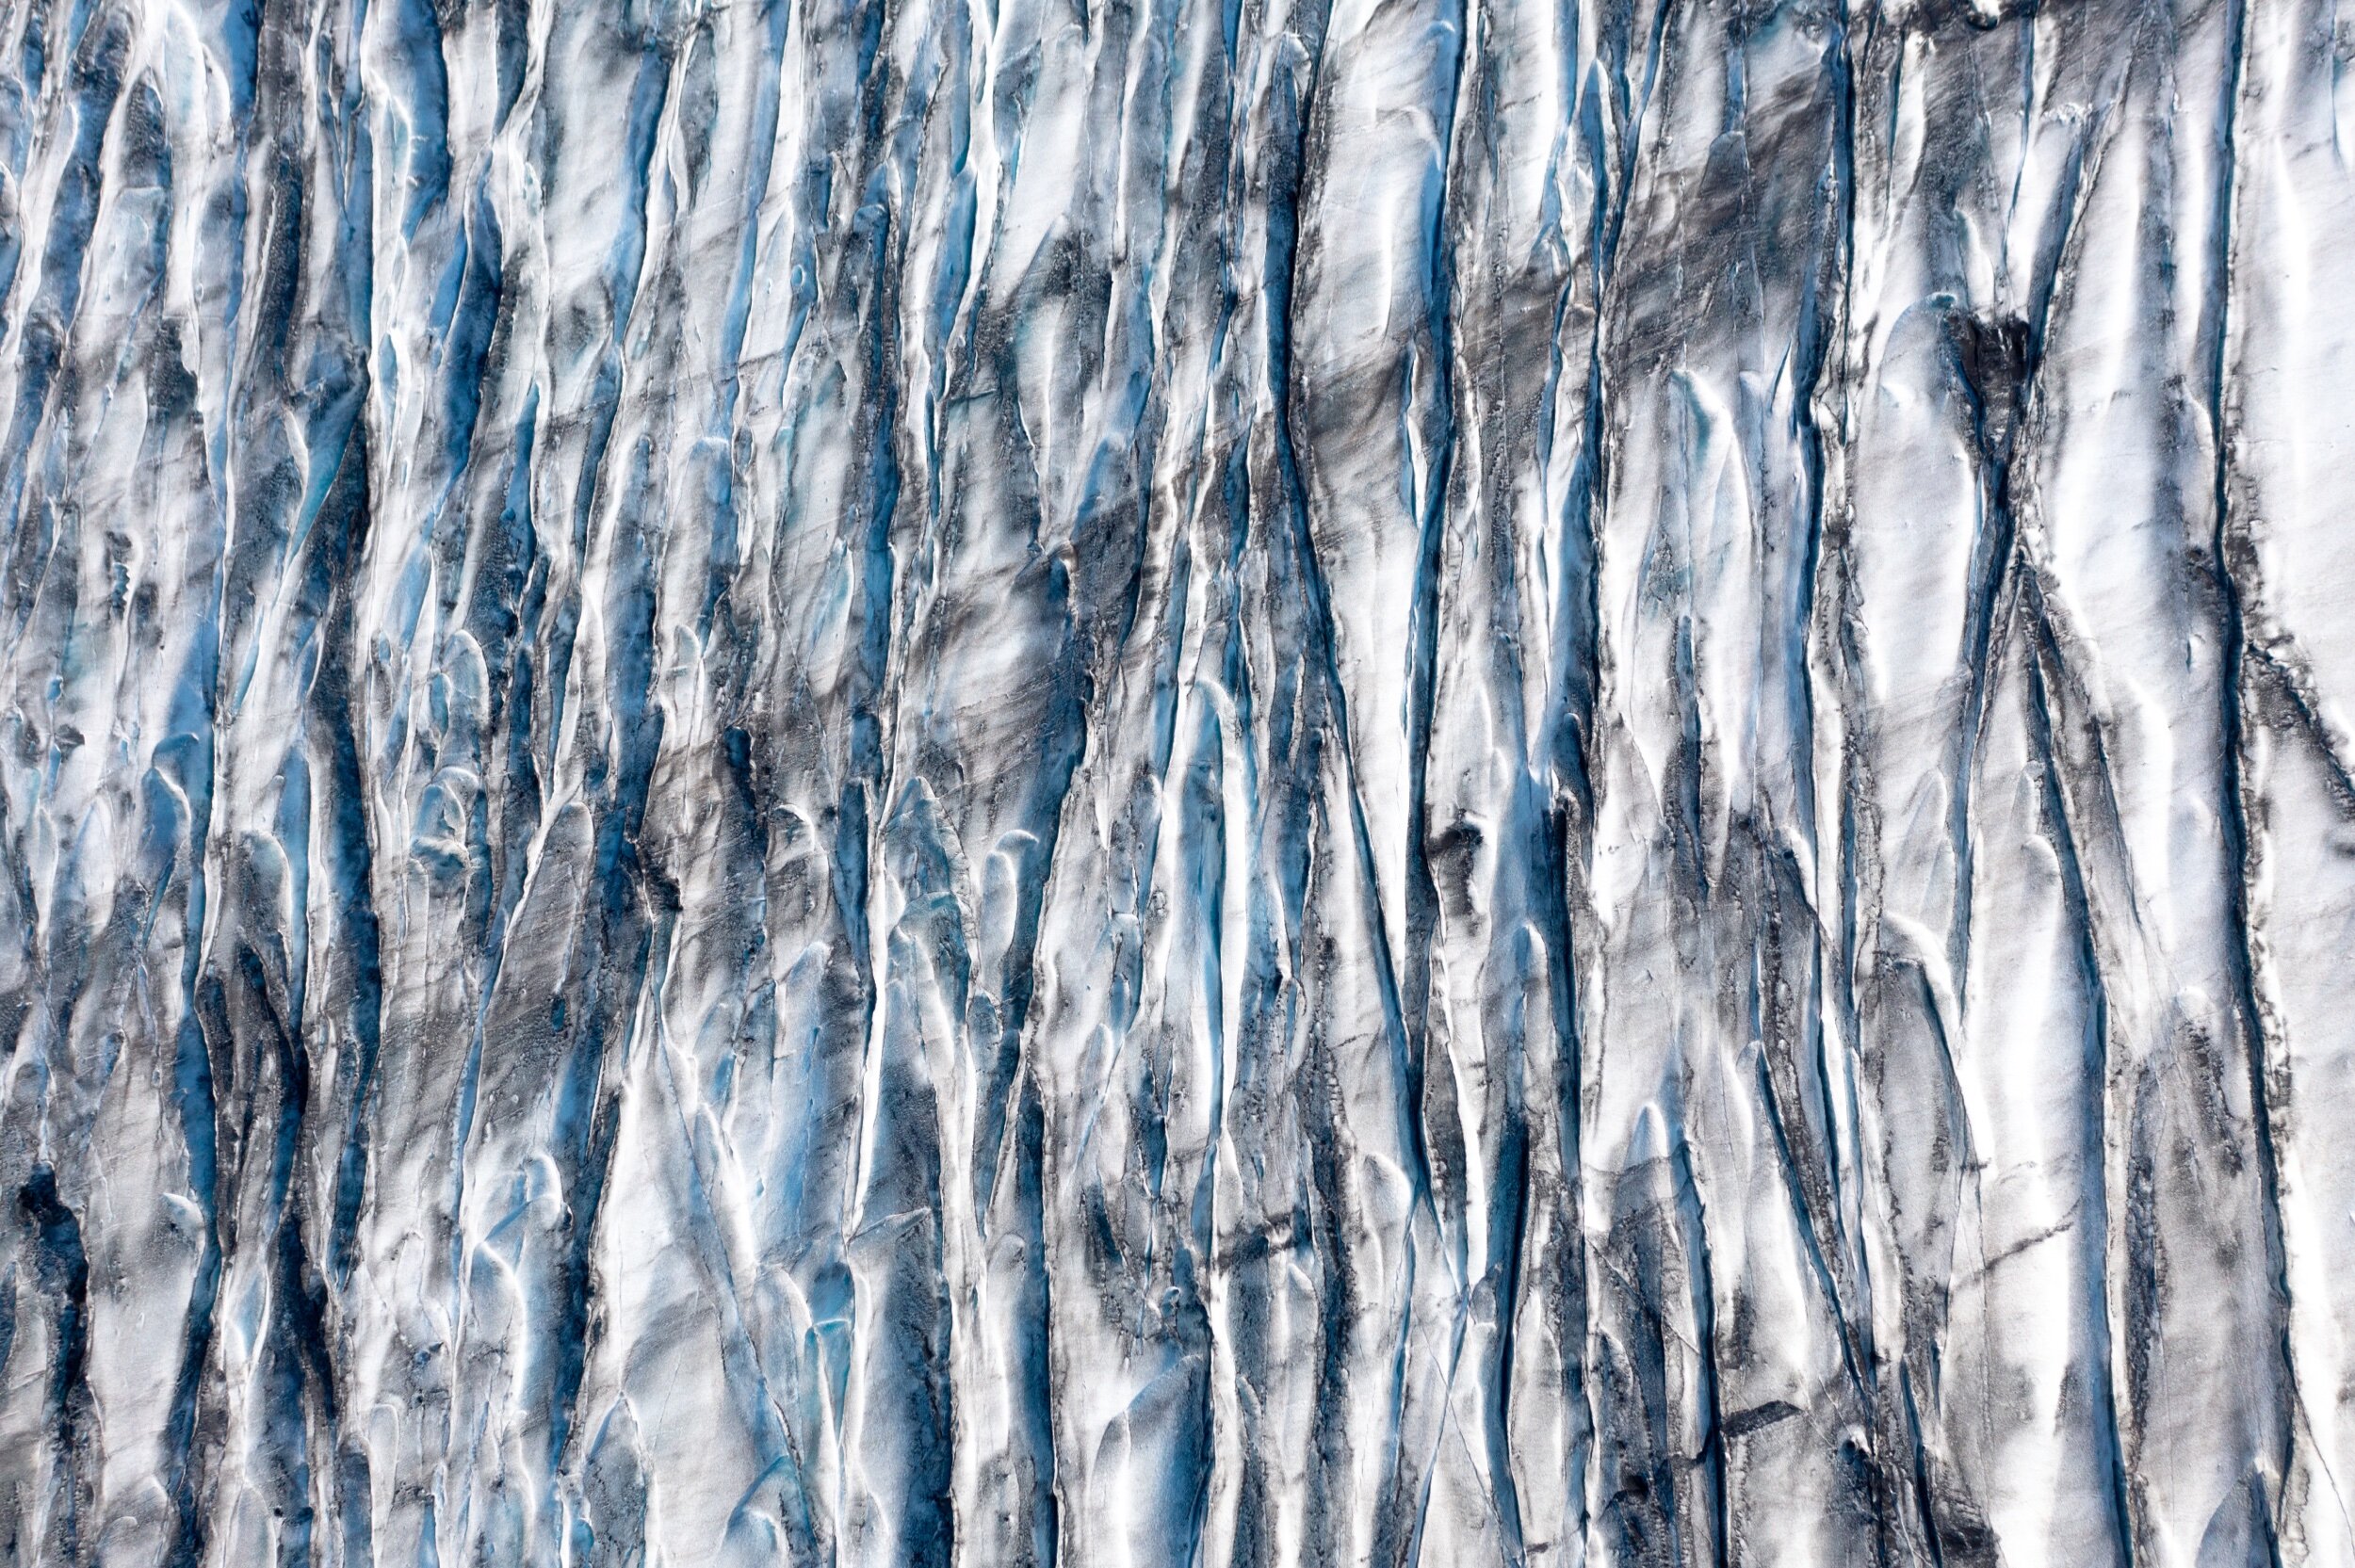 Glacier Patterns, Iceland by Valentinos Loucaides 2021 / @chlouk